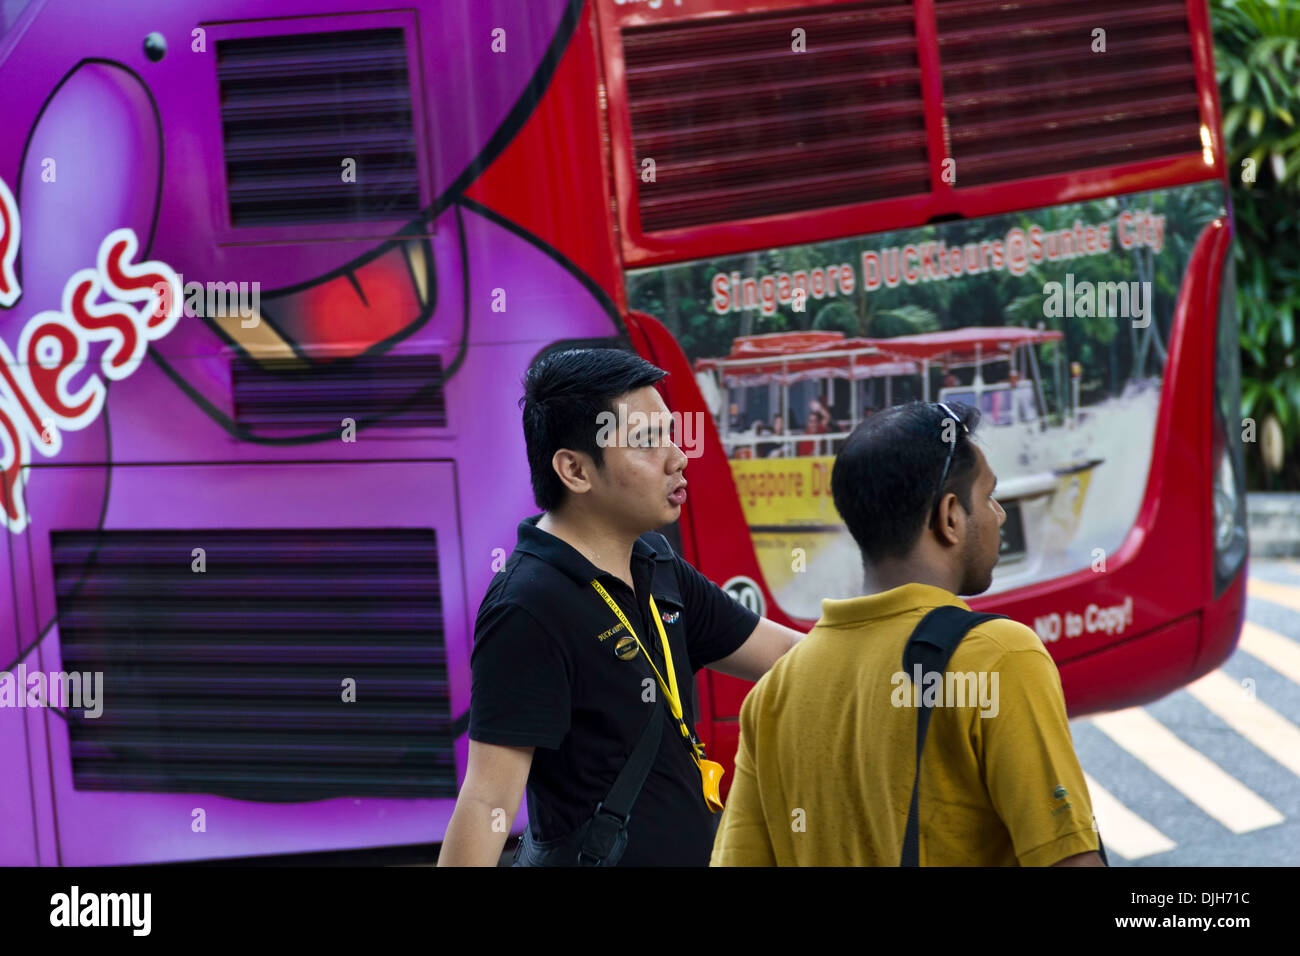 2 men near the back of a tour bus used for different city tours in Singapore, with one being a tourist and the other a guide Stock Photo